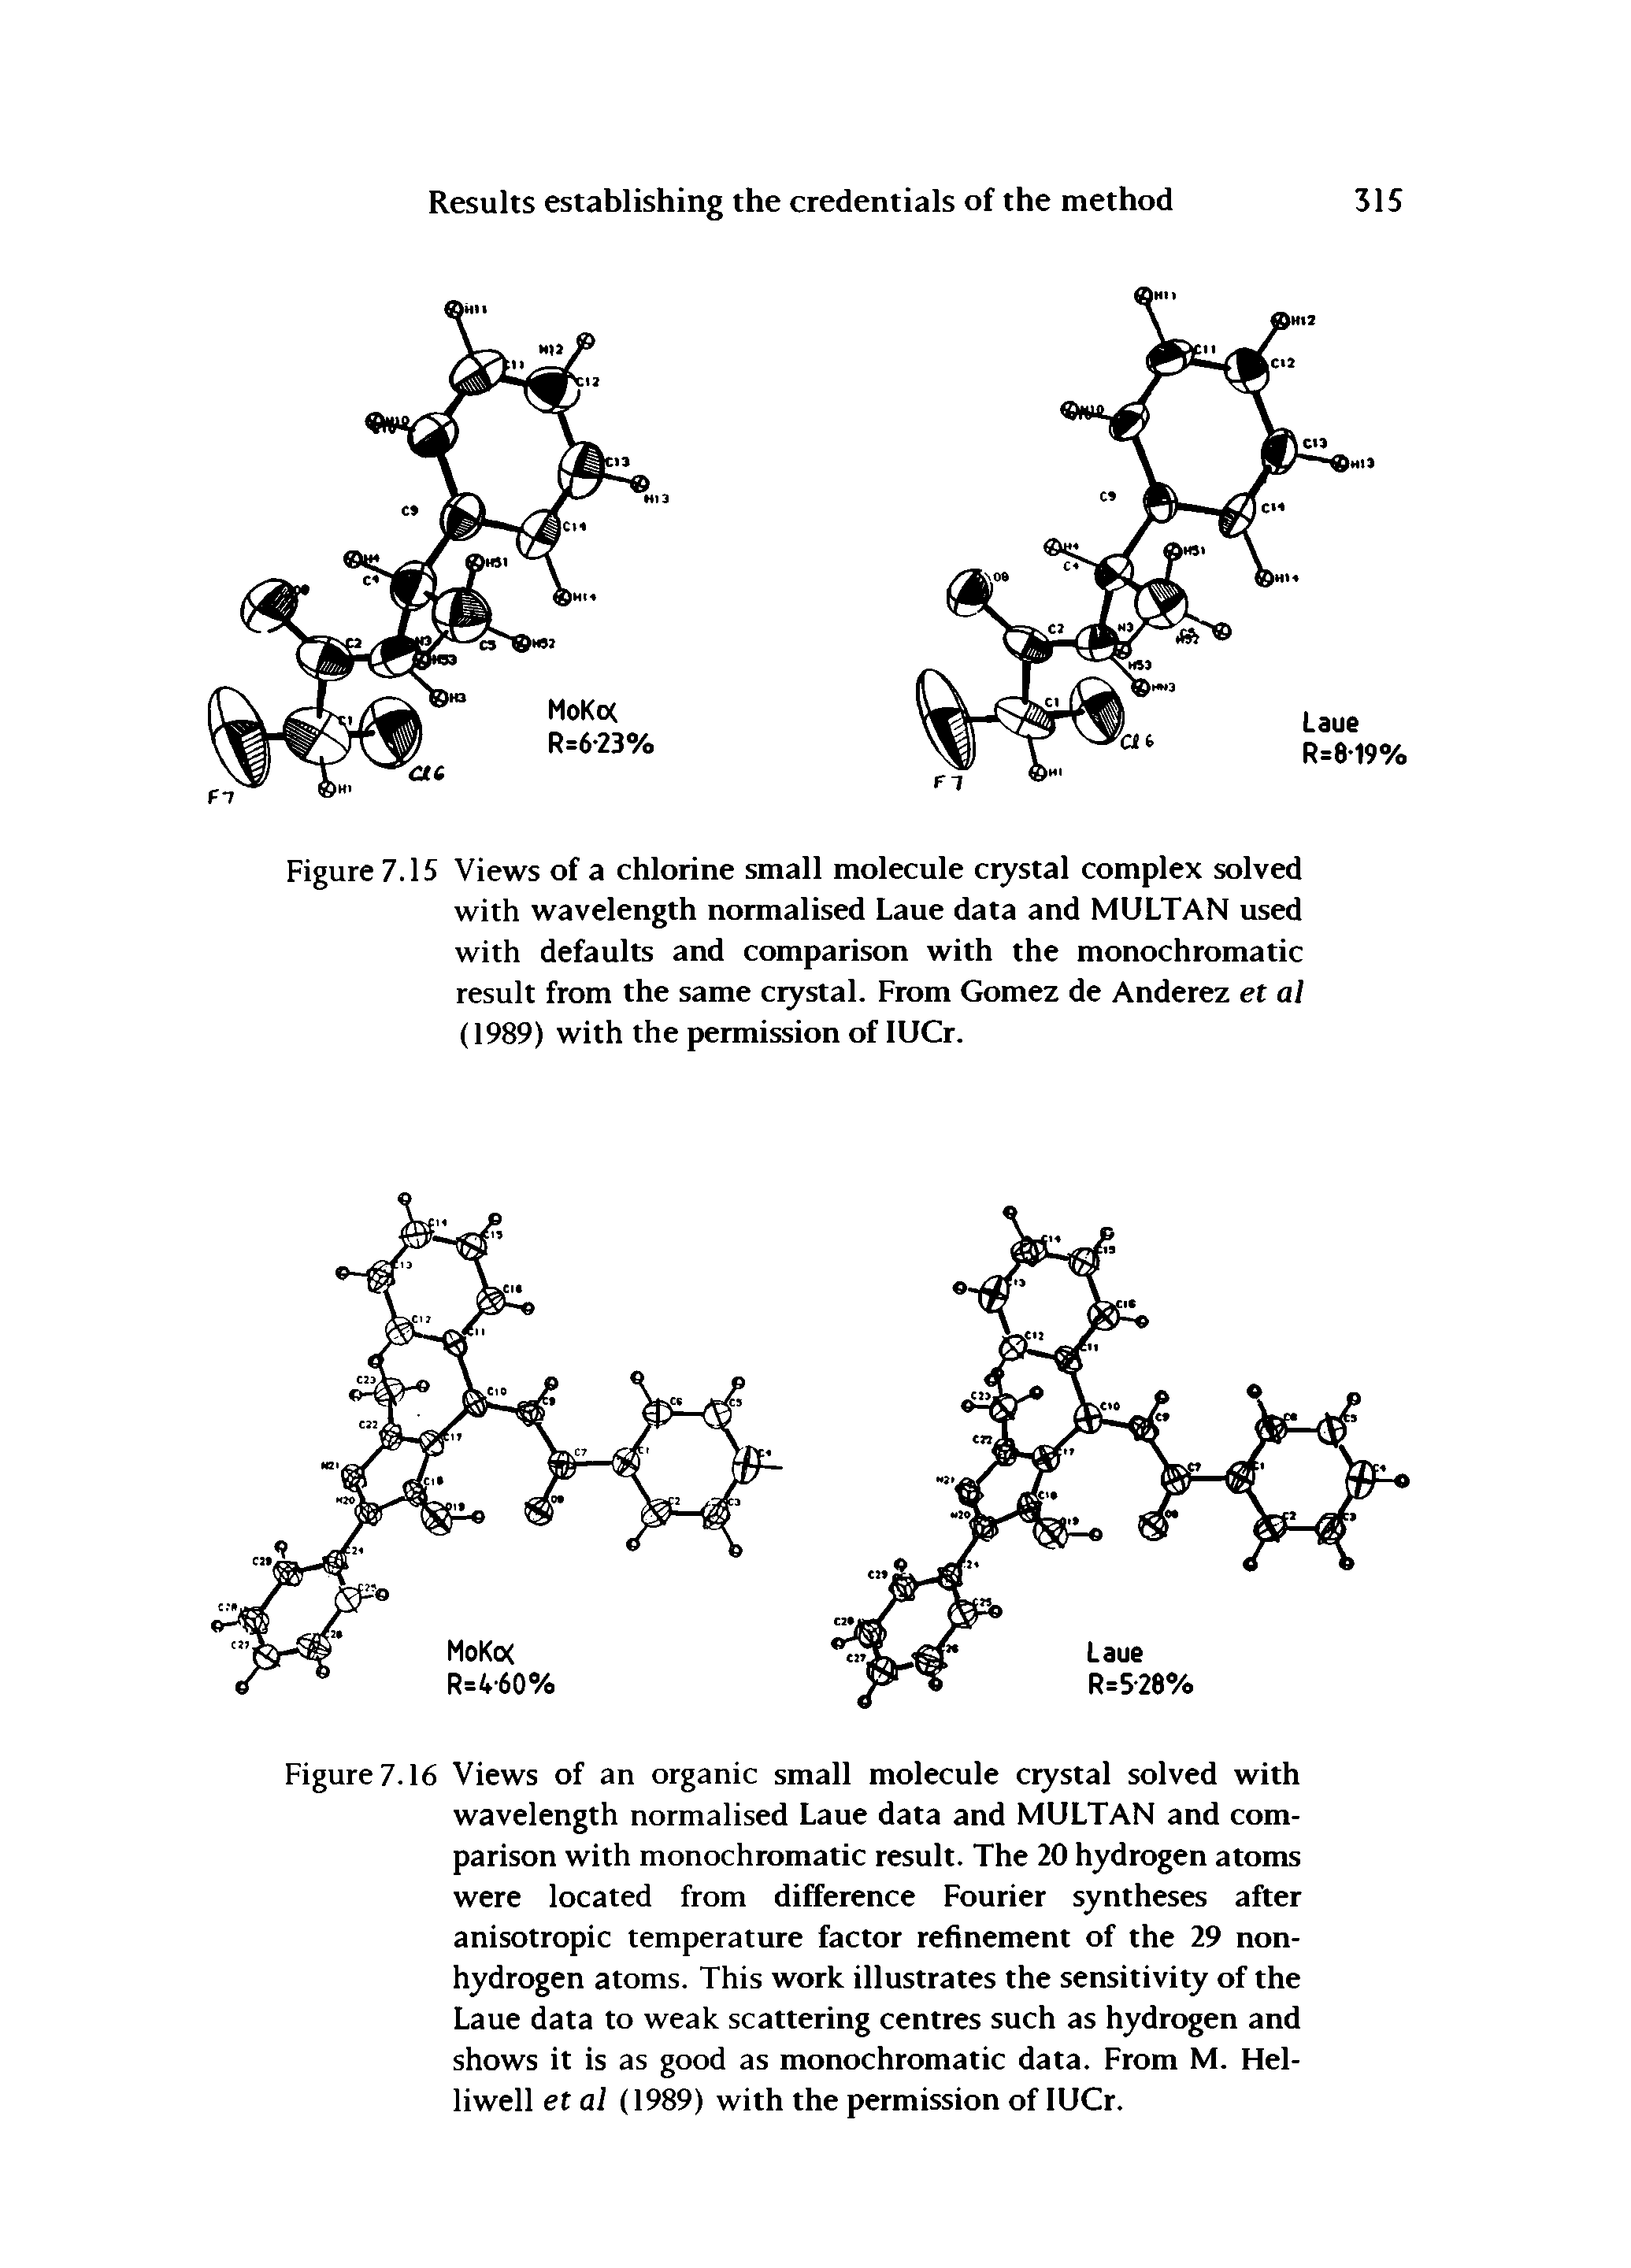 Figure 7.16 Views of an organic small molecule crystal solved with wavelength normalised Laue data and MULTAN and comparison with monochromatic result. The 20 hydrogen atoms were located from difference Fourier syntheses after anisotropic temperature factor refinement of the 29 nonhydrogen atoms. This work illustrates the sensitivity of the Laue data to weak scattering centres such as hydrogen and shows it is as good as monochromatic data. From M. Hel-liwell et al (1989) with the permission of IUCr.